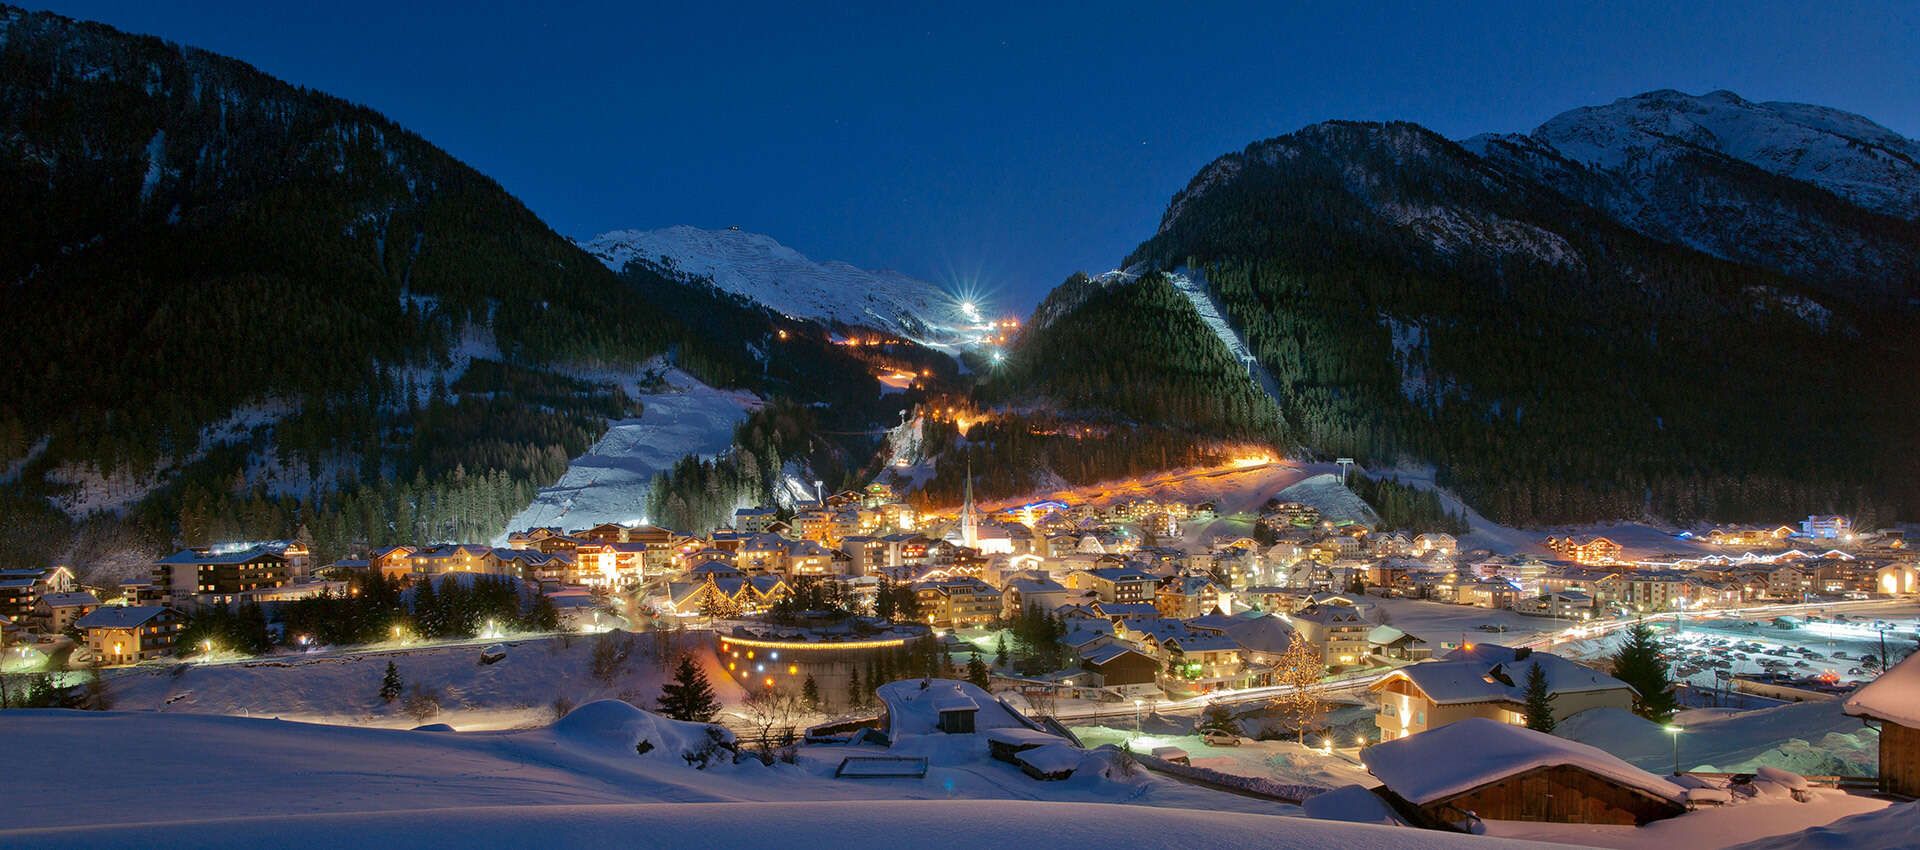 Town view of Ischgl in winter at night